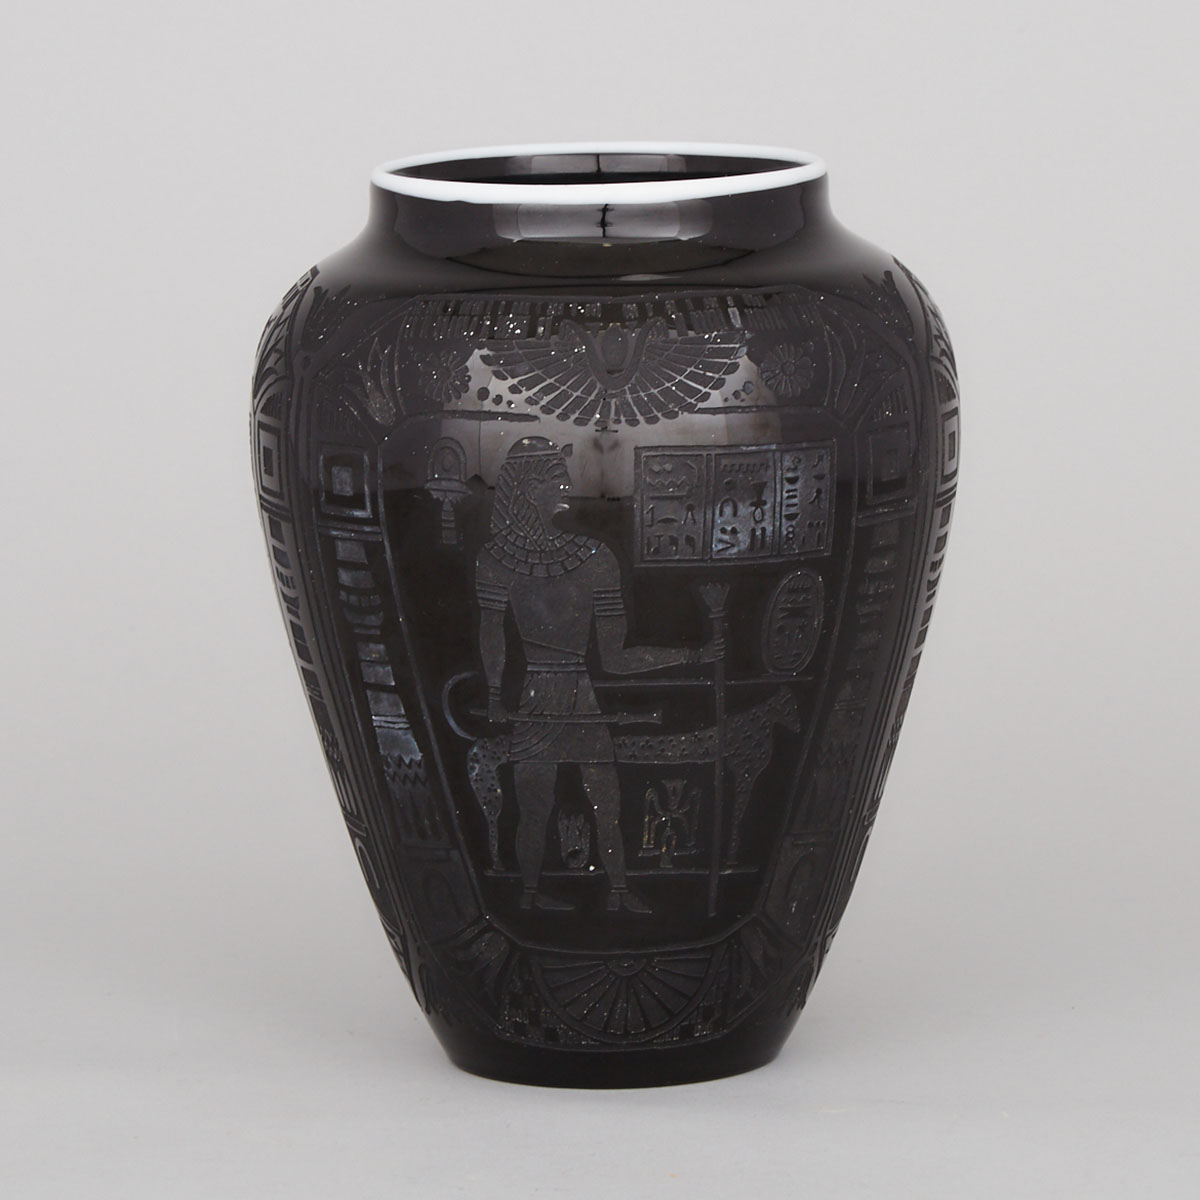 Sinclaire ‘Egyptian’ Etched Black Glass Vase, 1920s